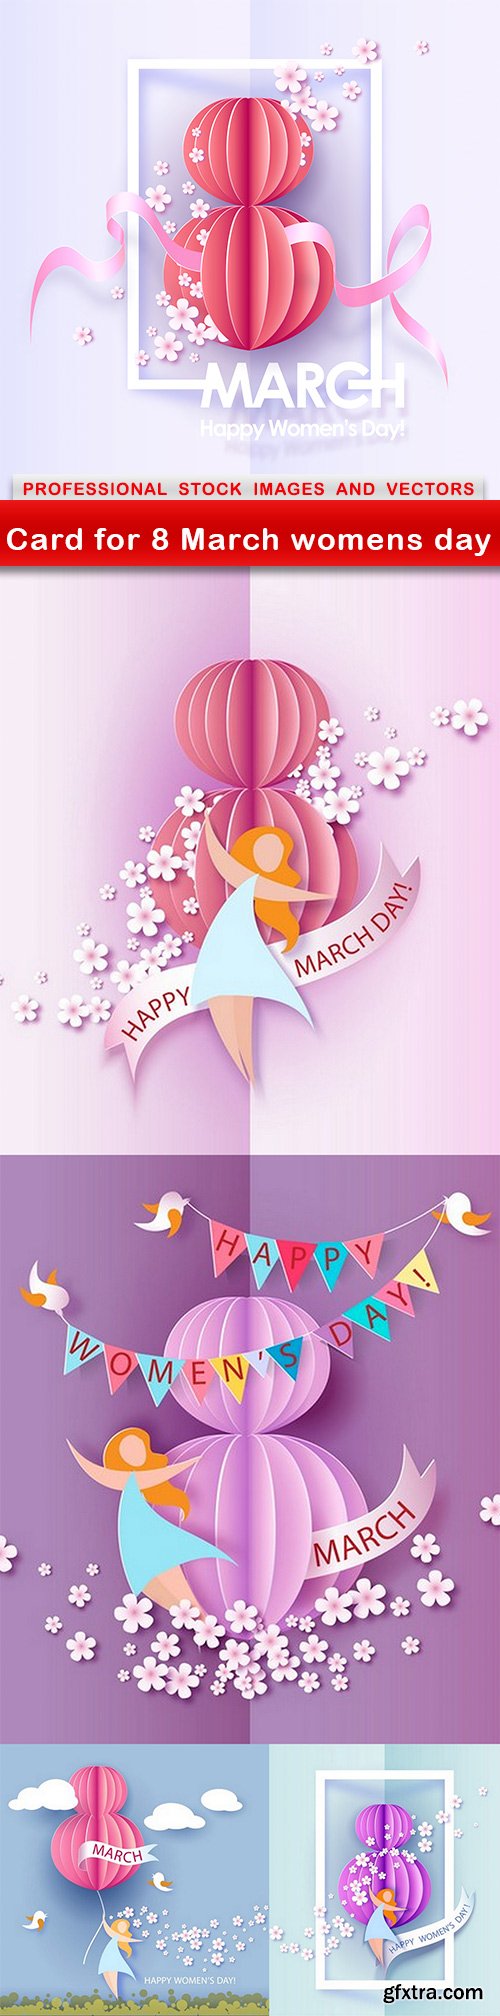 Card for 8 March womens day - 5 EPS